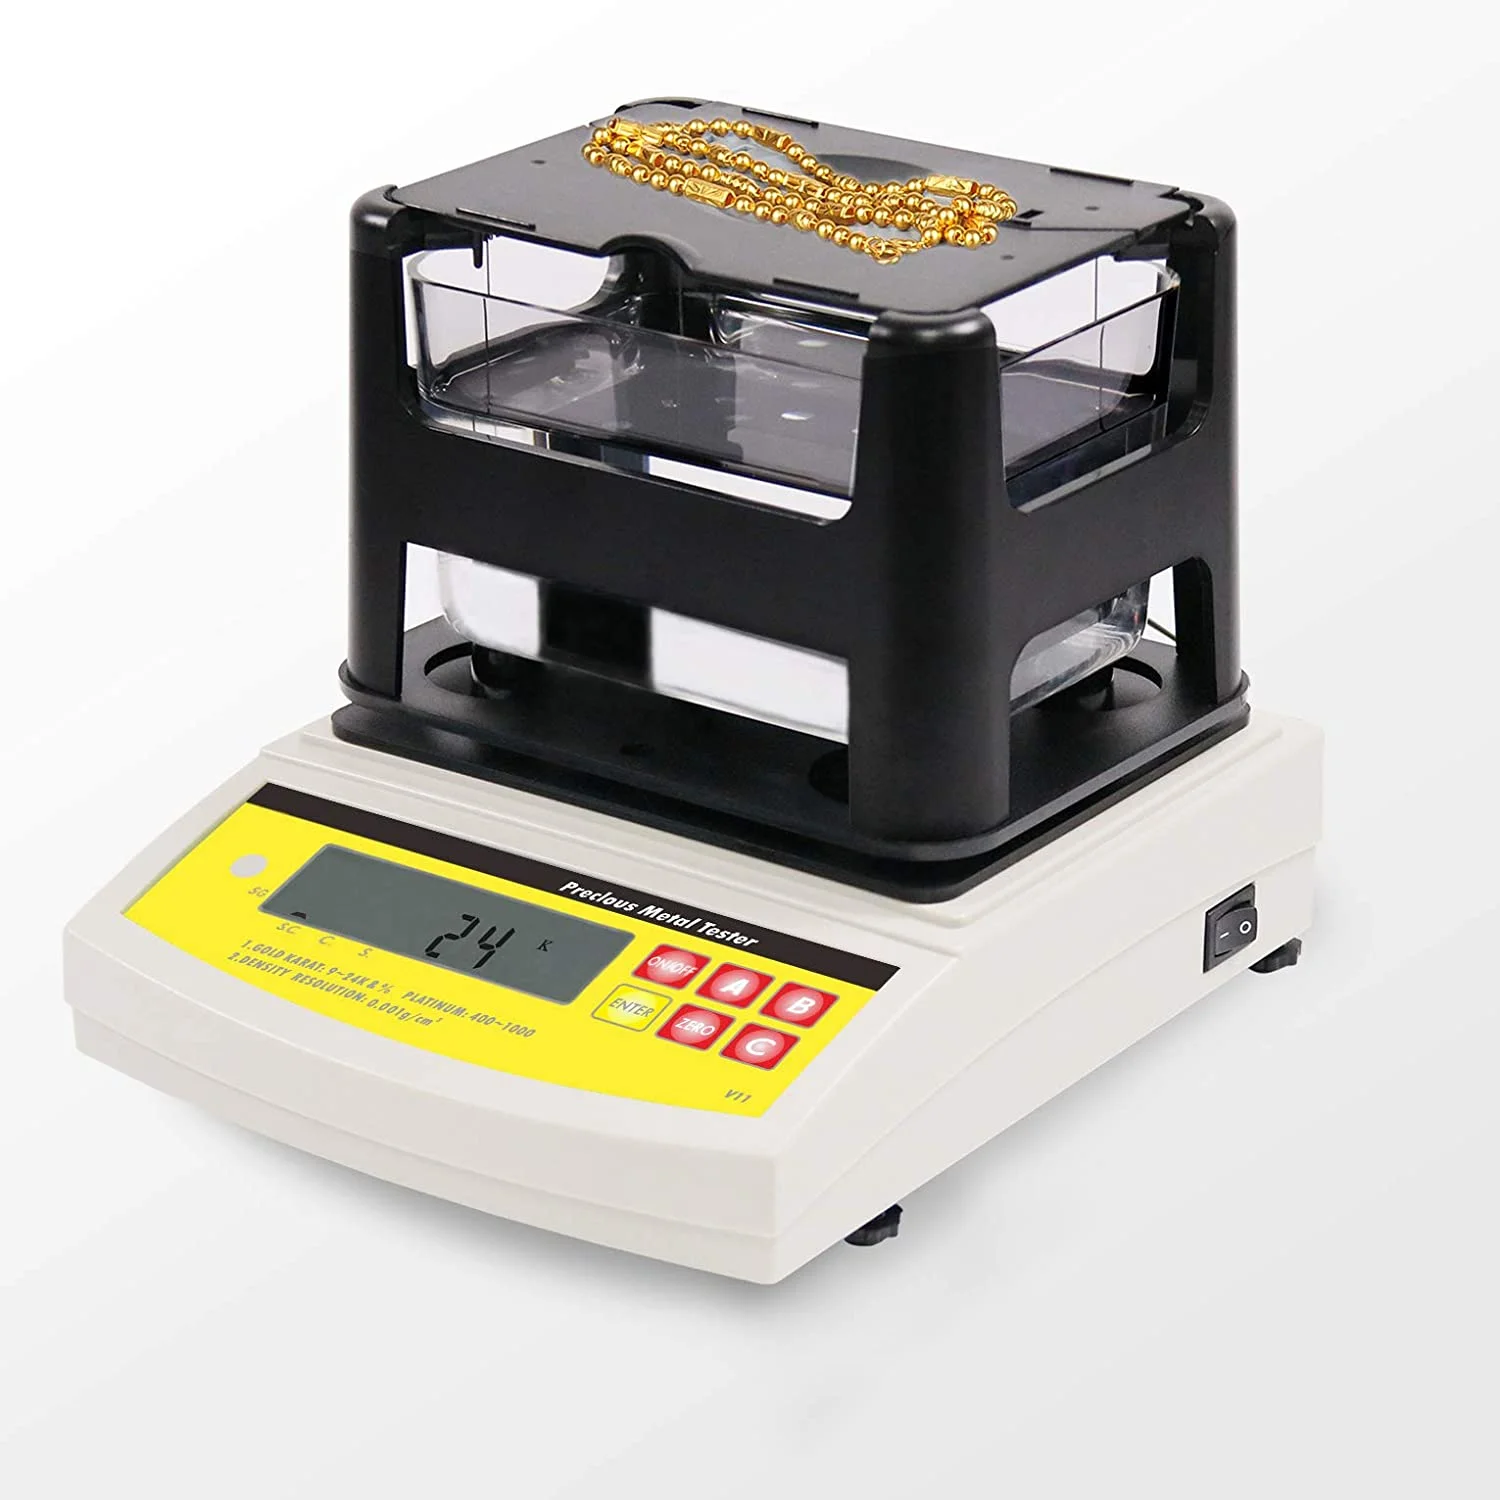 

DH-300K Gold Tester Portable,Gold Purity Tester Electronic In Testing